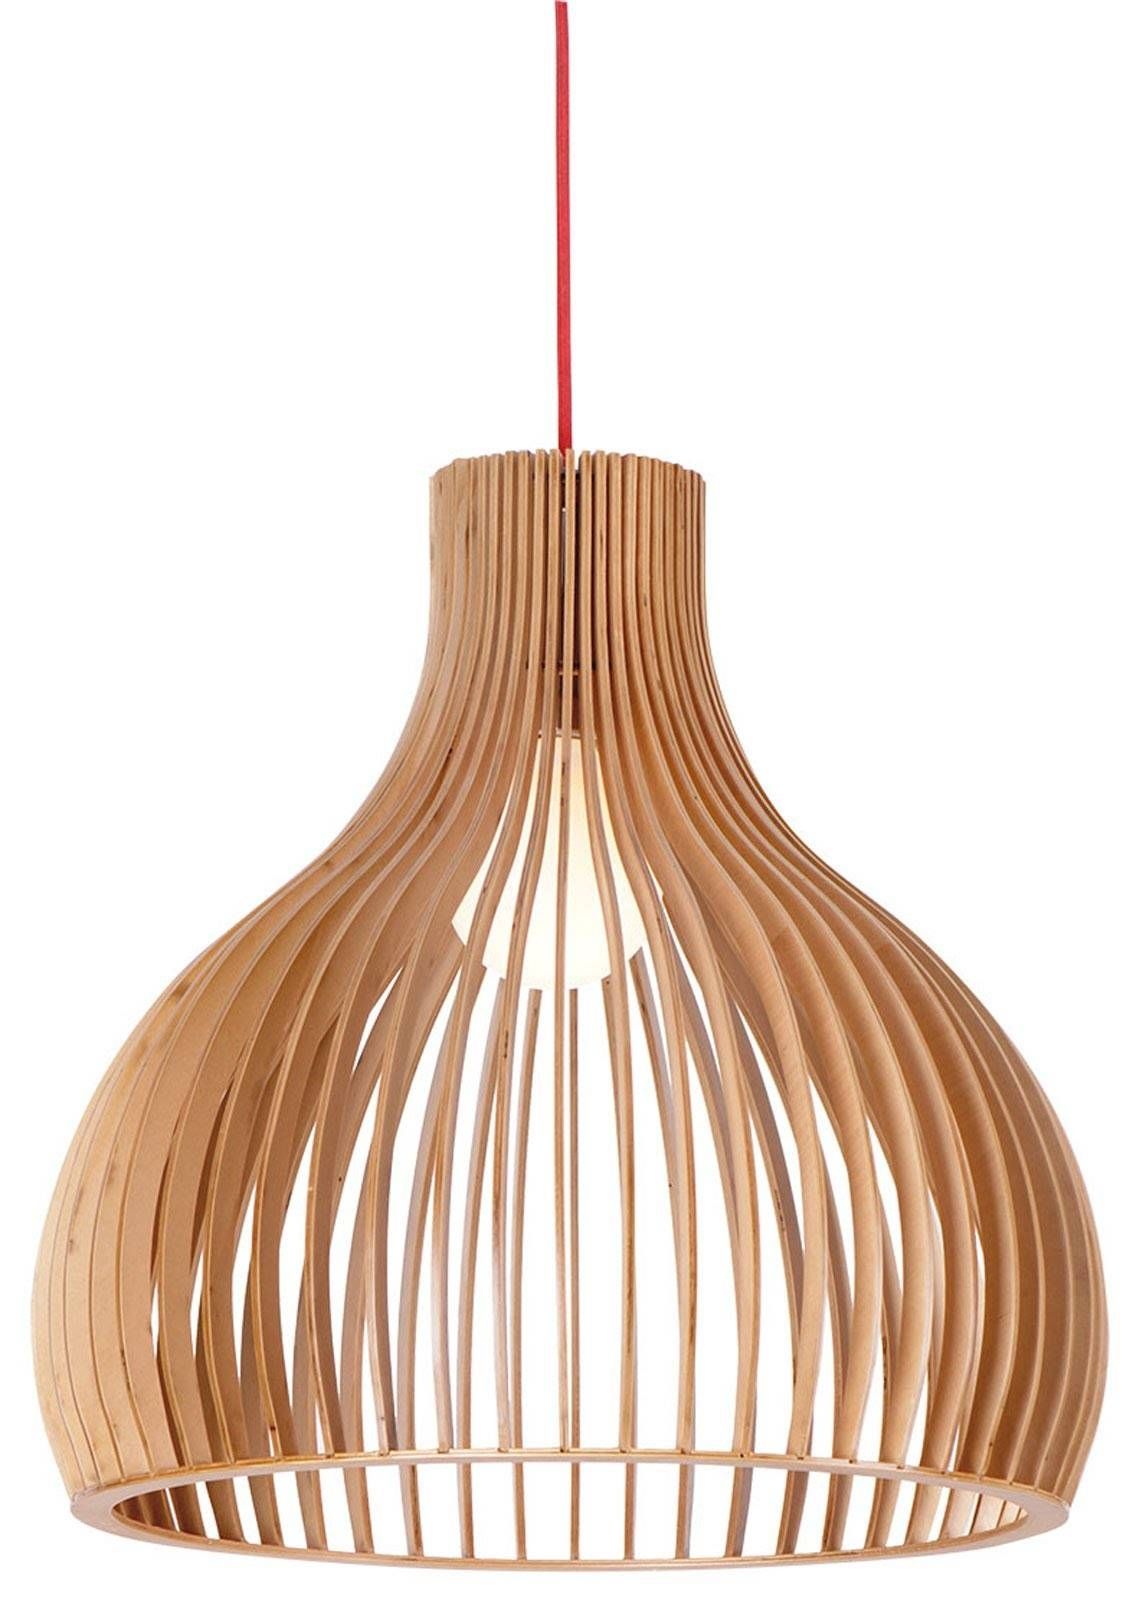 Buy Wood Pendant Light In Melbourne [malmo] – Youtube With Regard To Bentwood Pendant Lights (View 2 of 15)